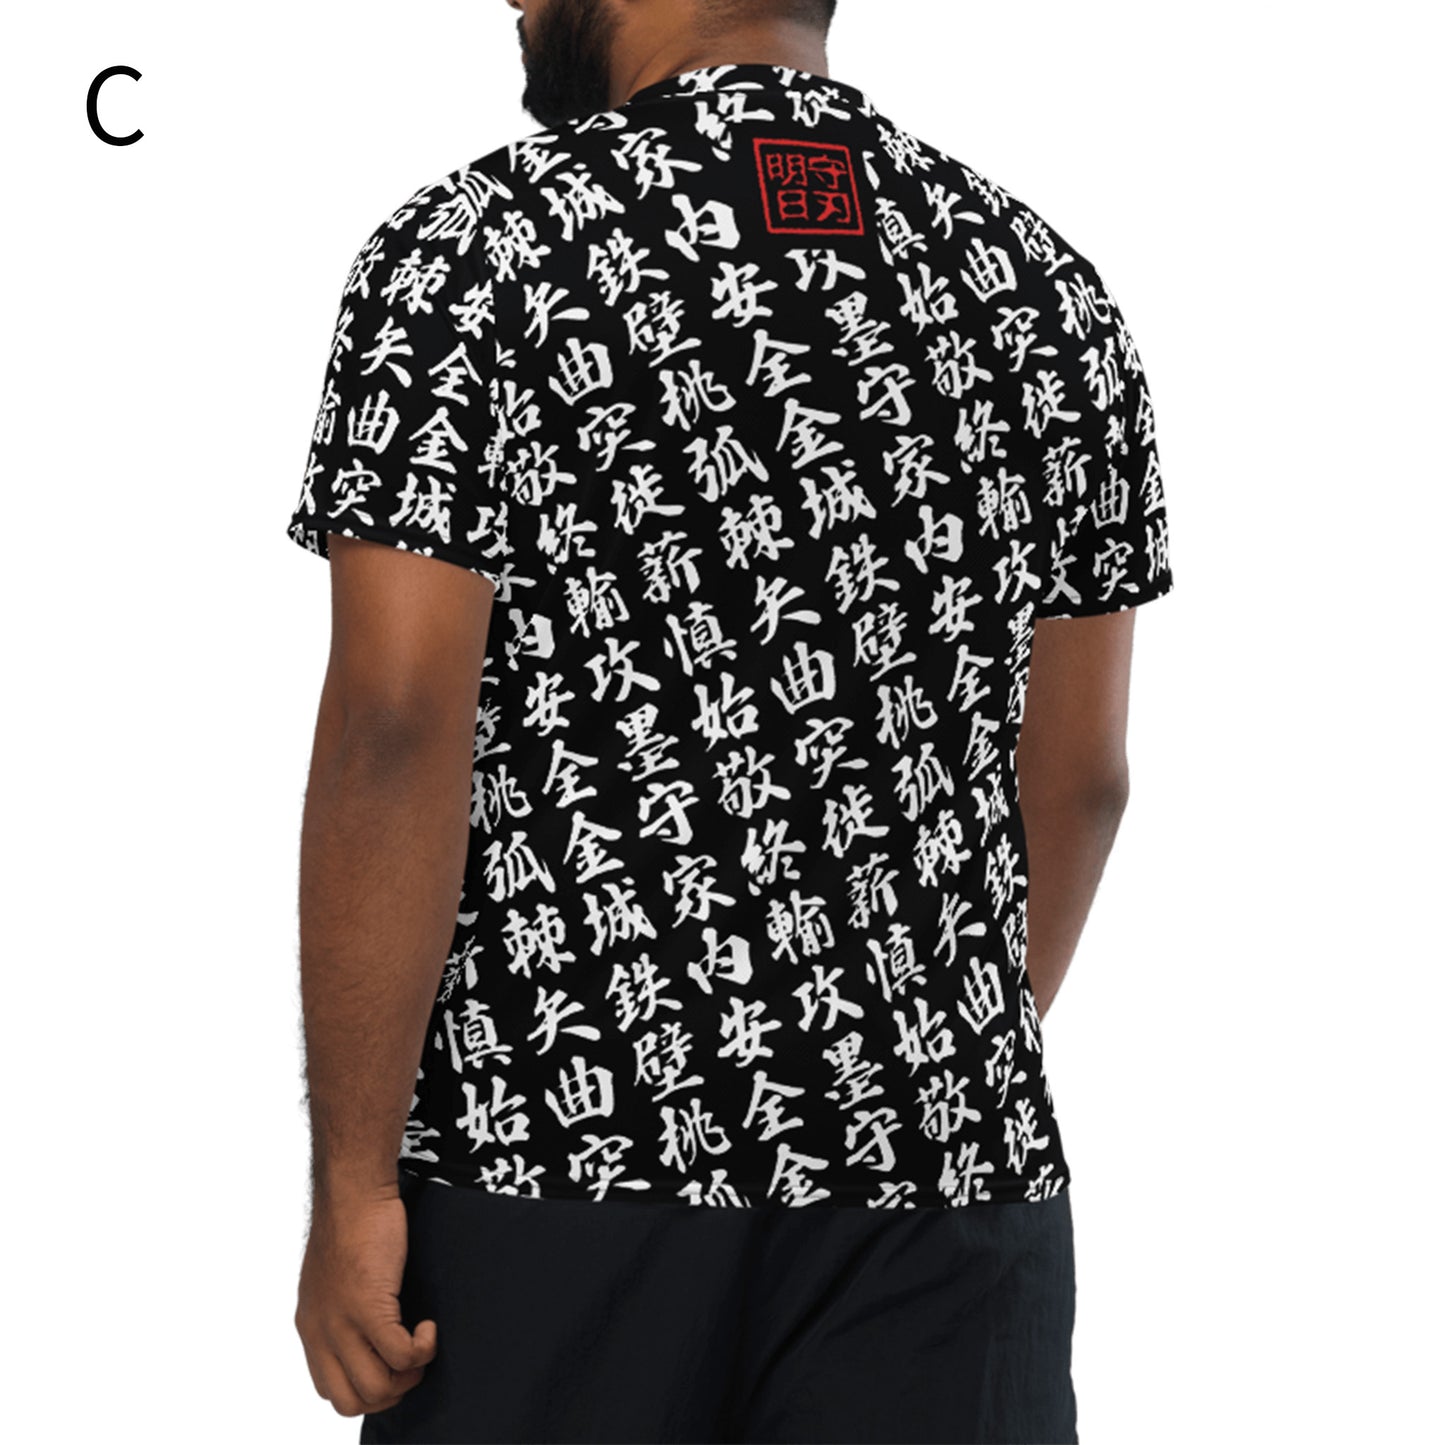 Unisex black Sports Jersey with all-over print in Japanese KANJI- man model C-3